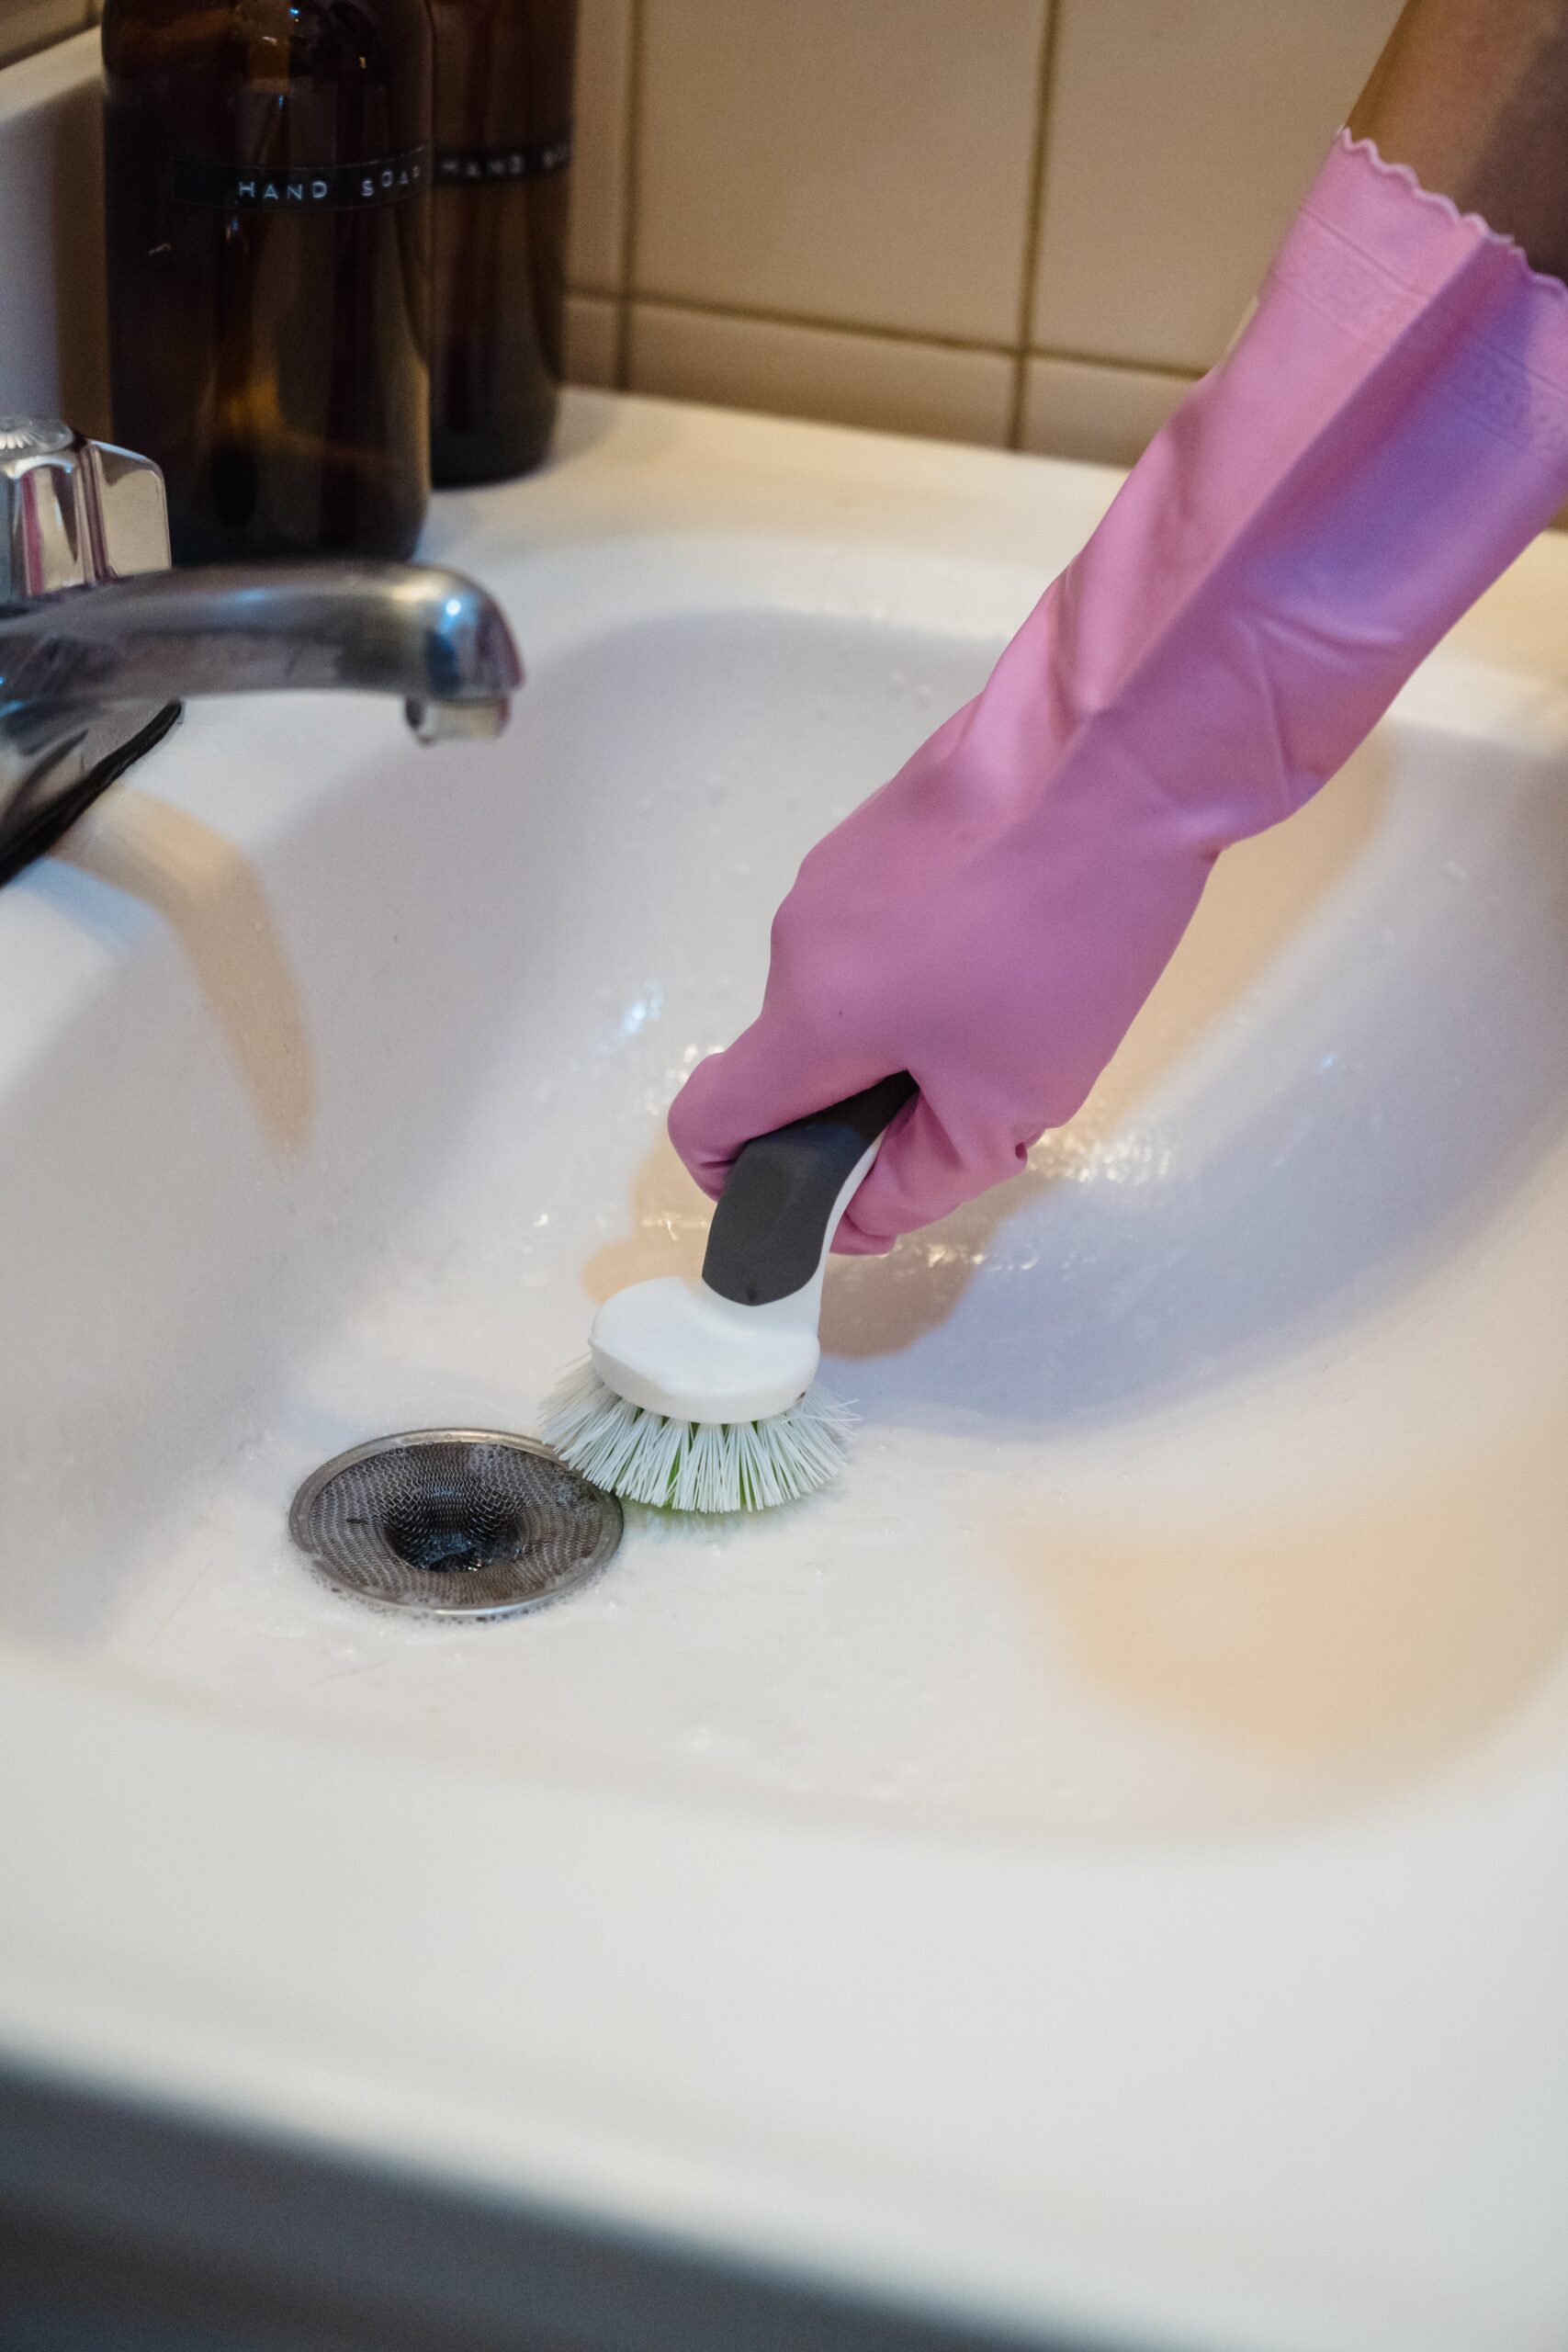 Decoding Drain Cleaning Understanding When and Why It's Necessary